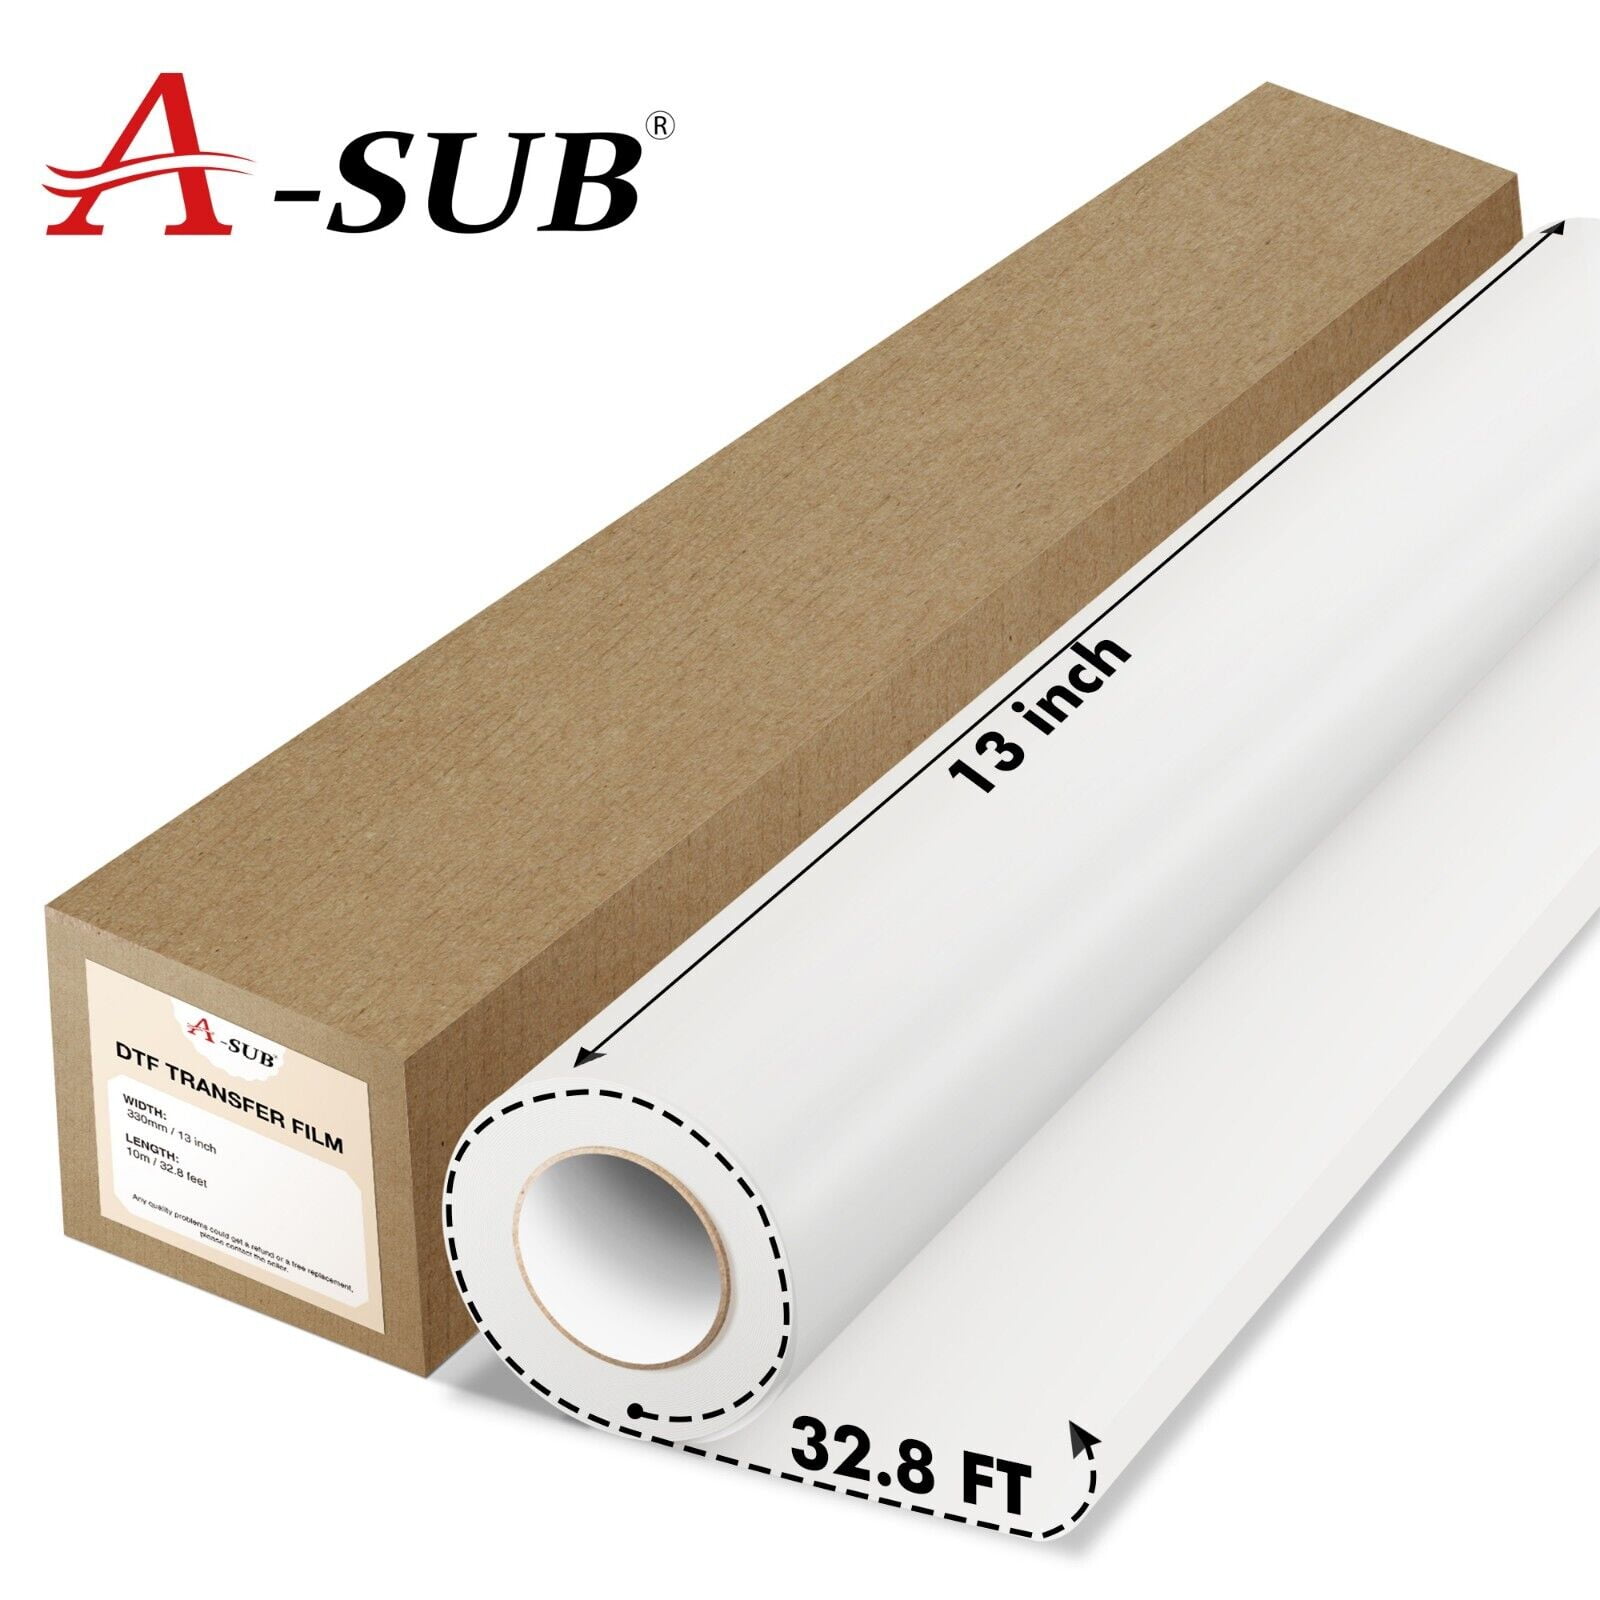 A-SUB DTF Film Roll 13 in X 32.8 FT， DTF Transfer Film for